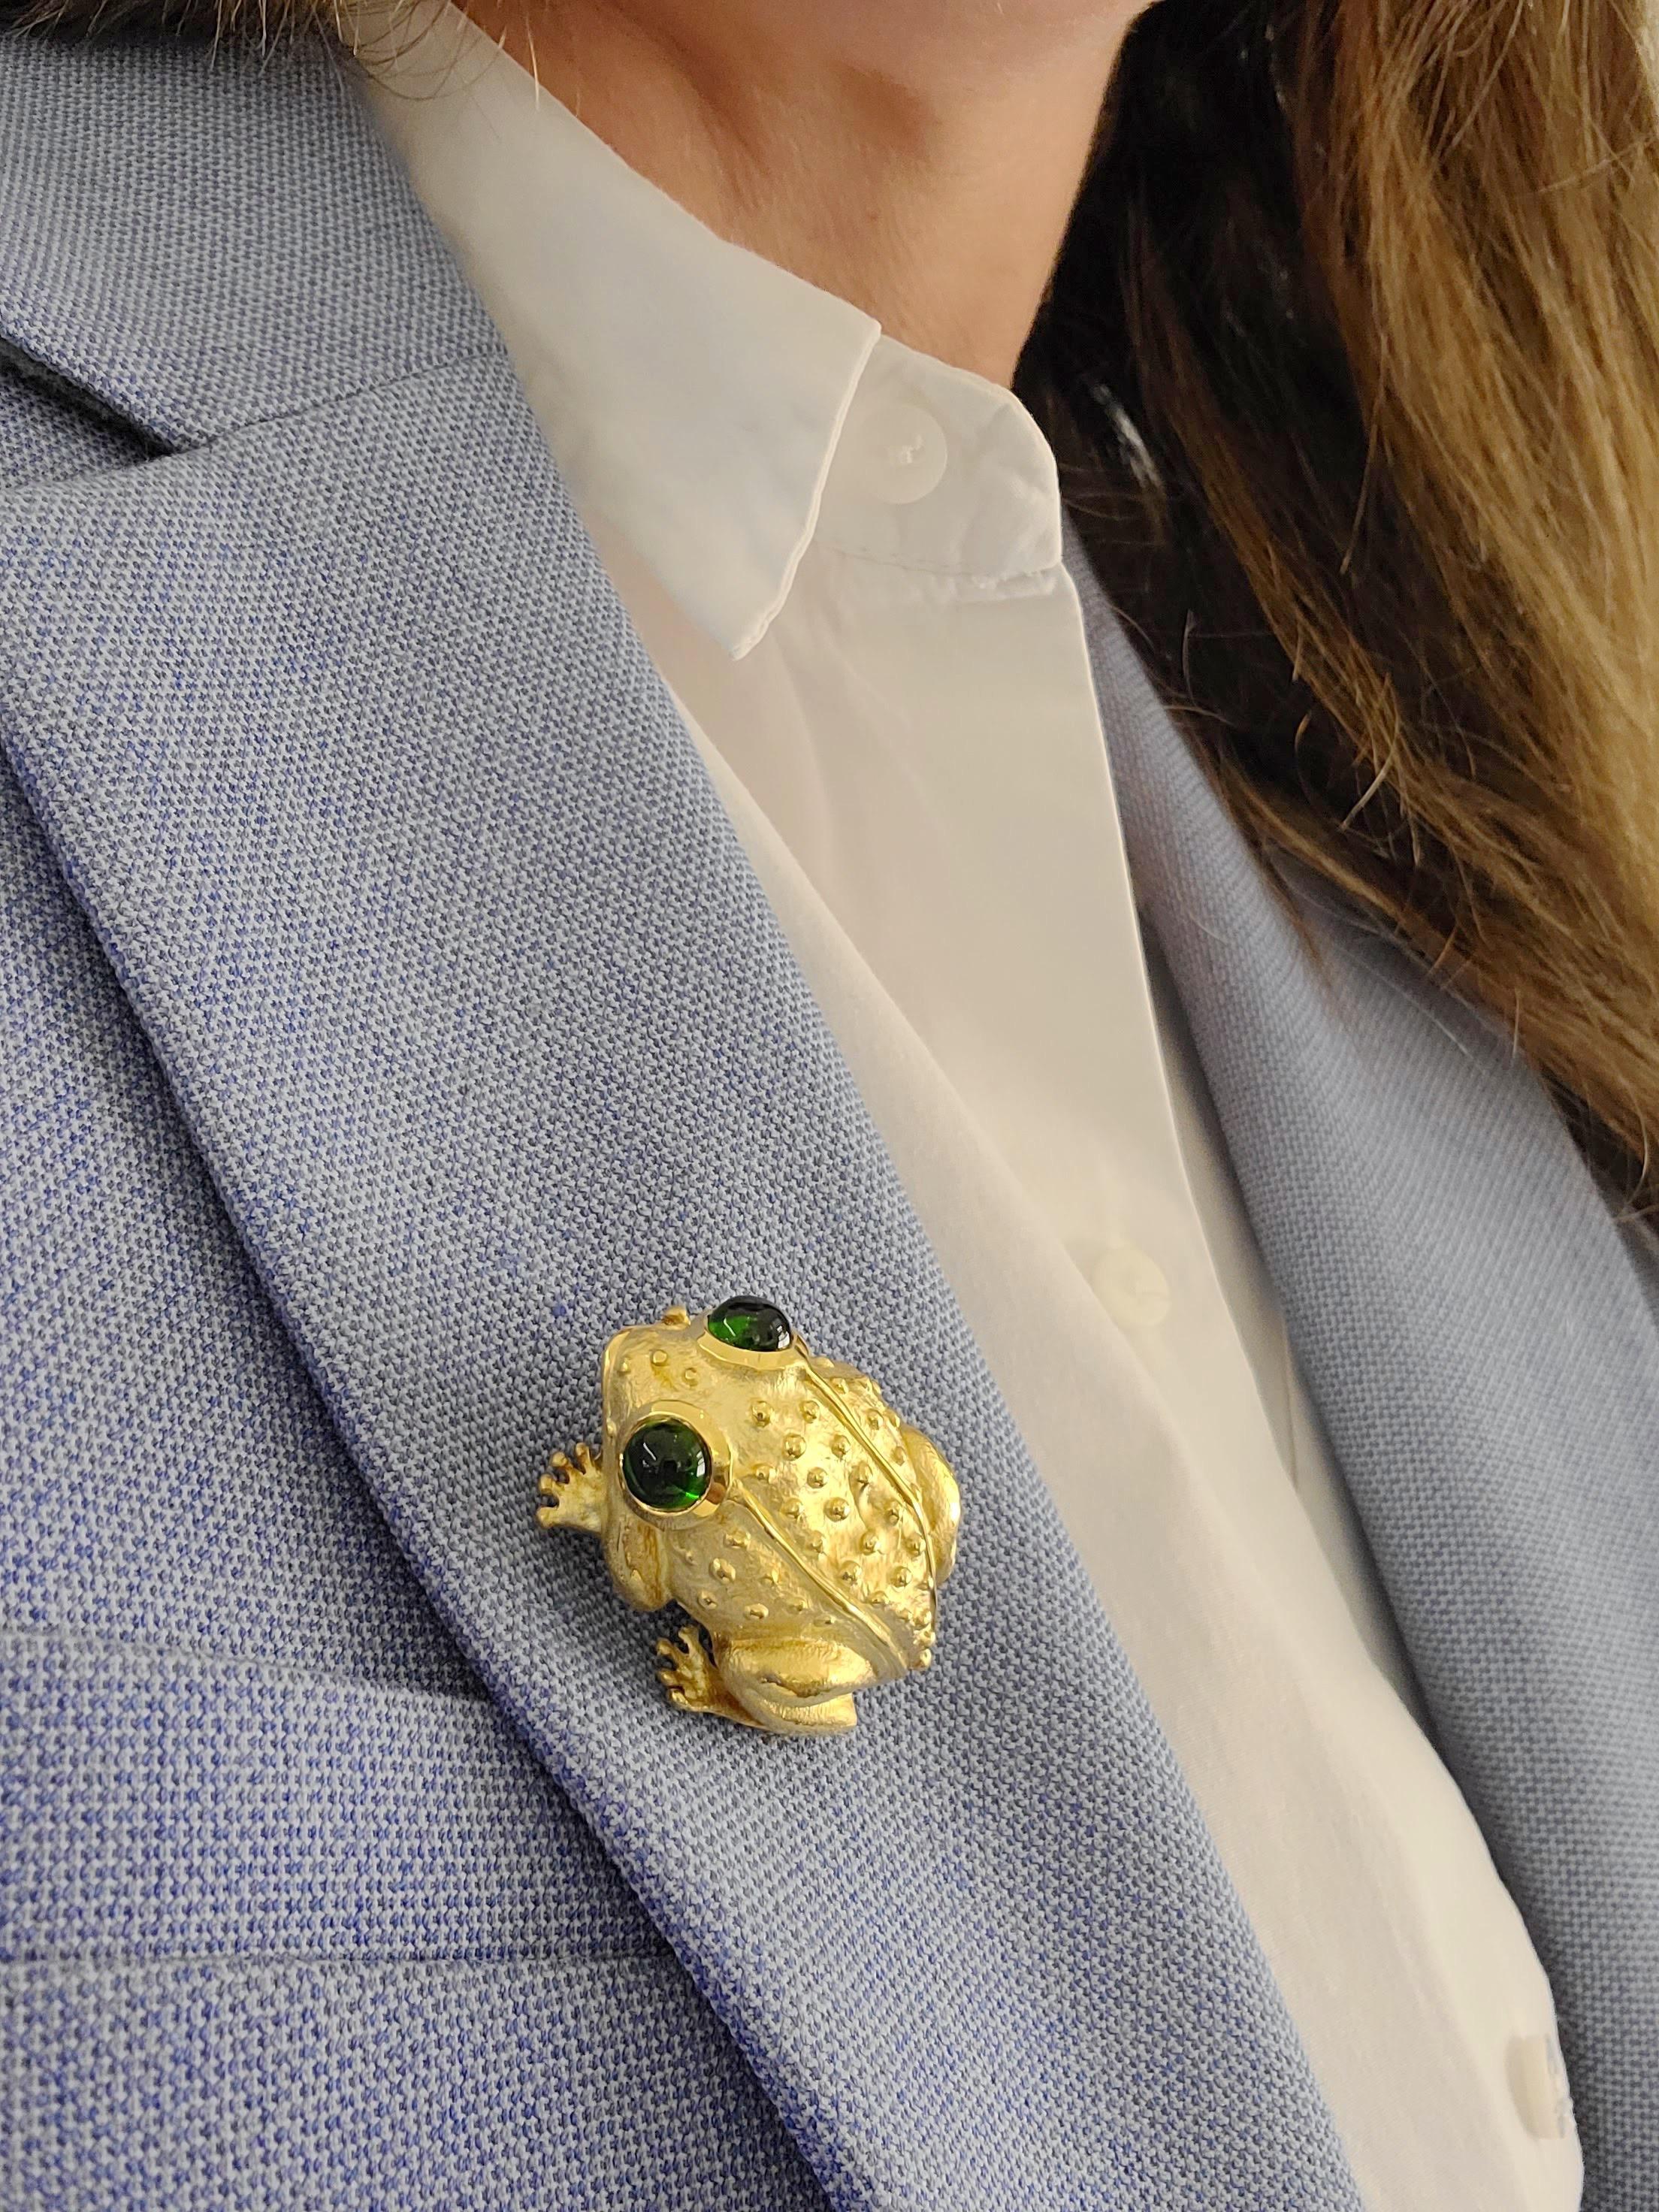 Contemporary 18 Karat Yellow Gold Bullfrog Brooch with Cabochon Green Tourmaline Eyes For Sale